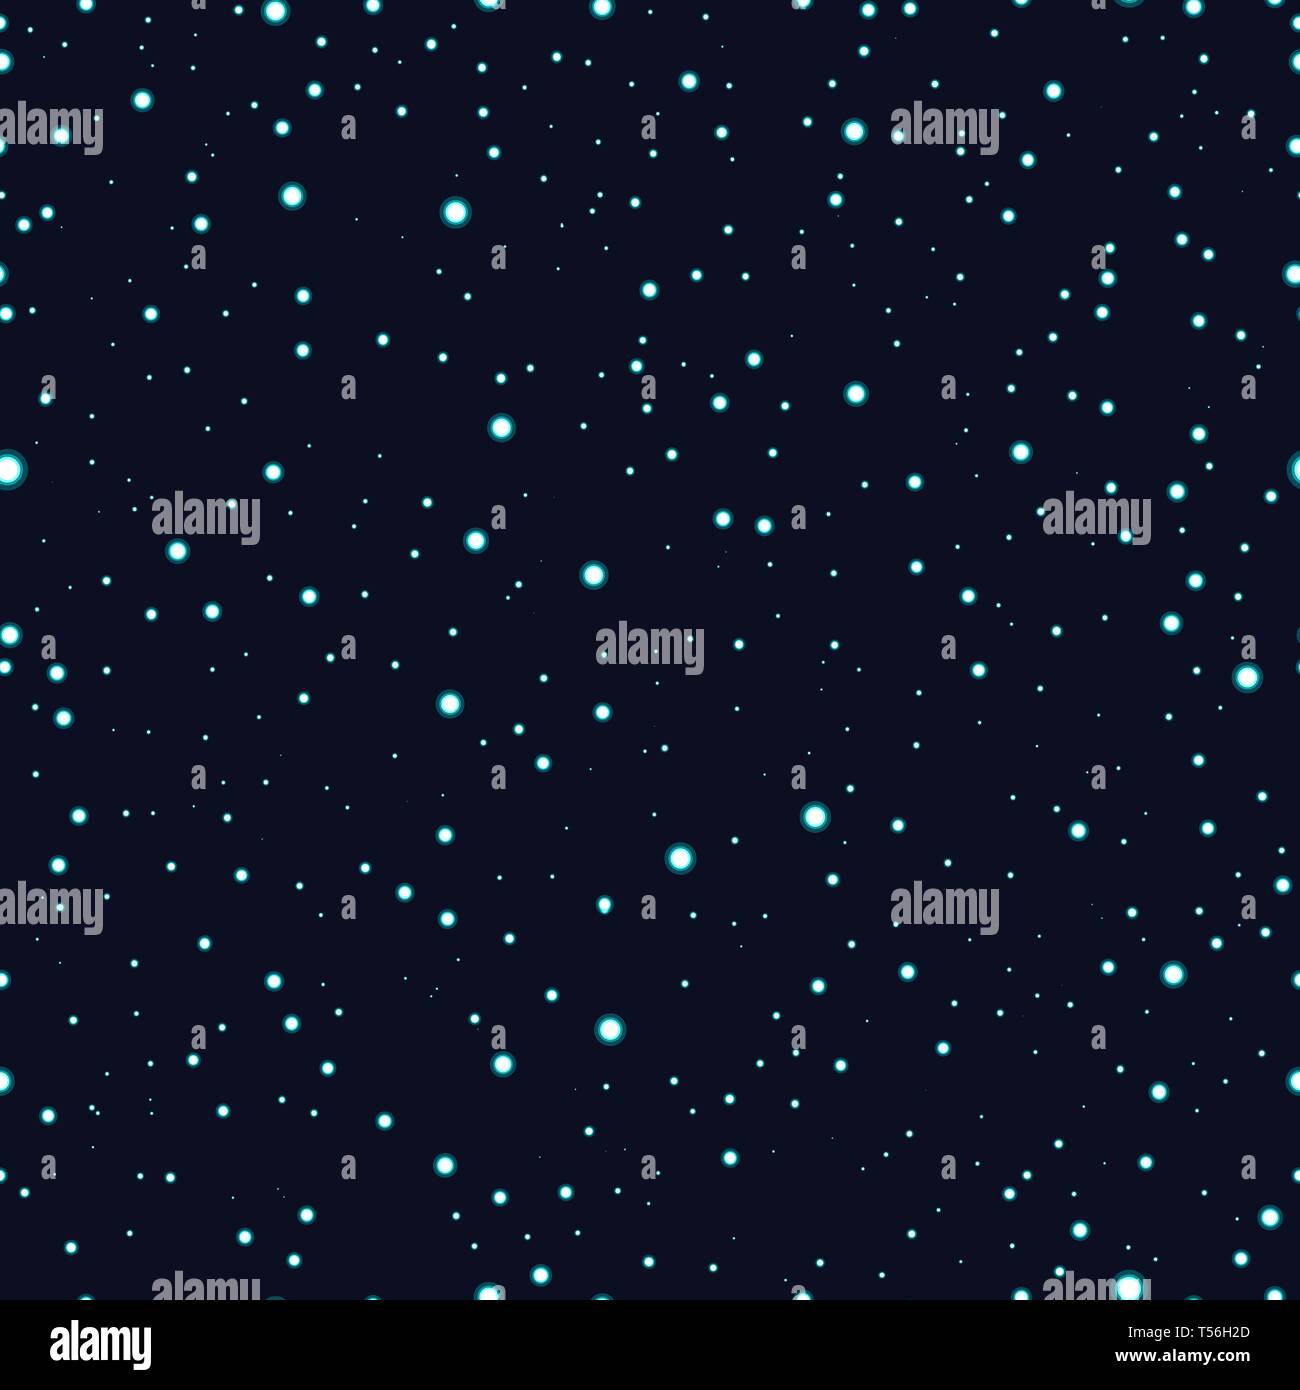 Astronnomic Art Space Seamless Pattern. Endless repeatable night sky ...